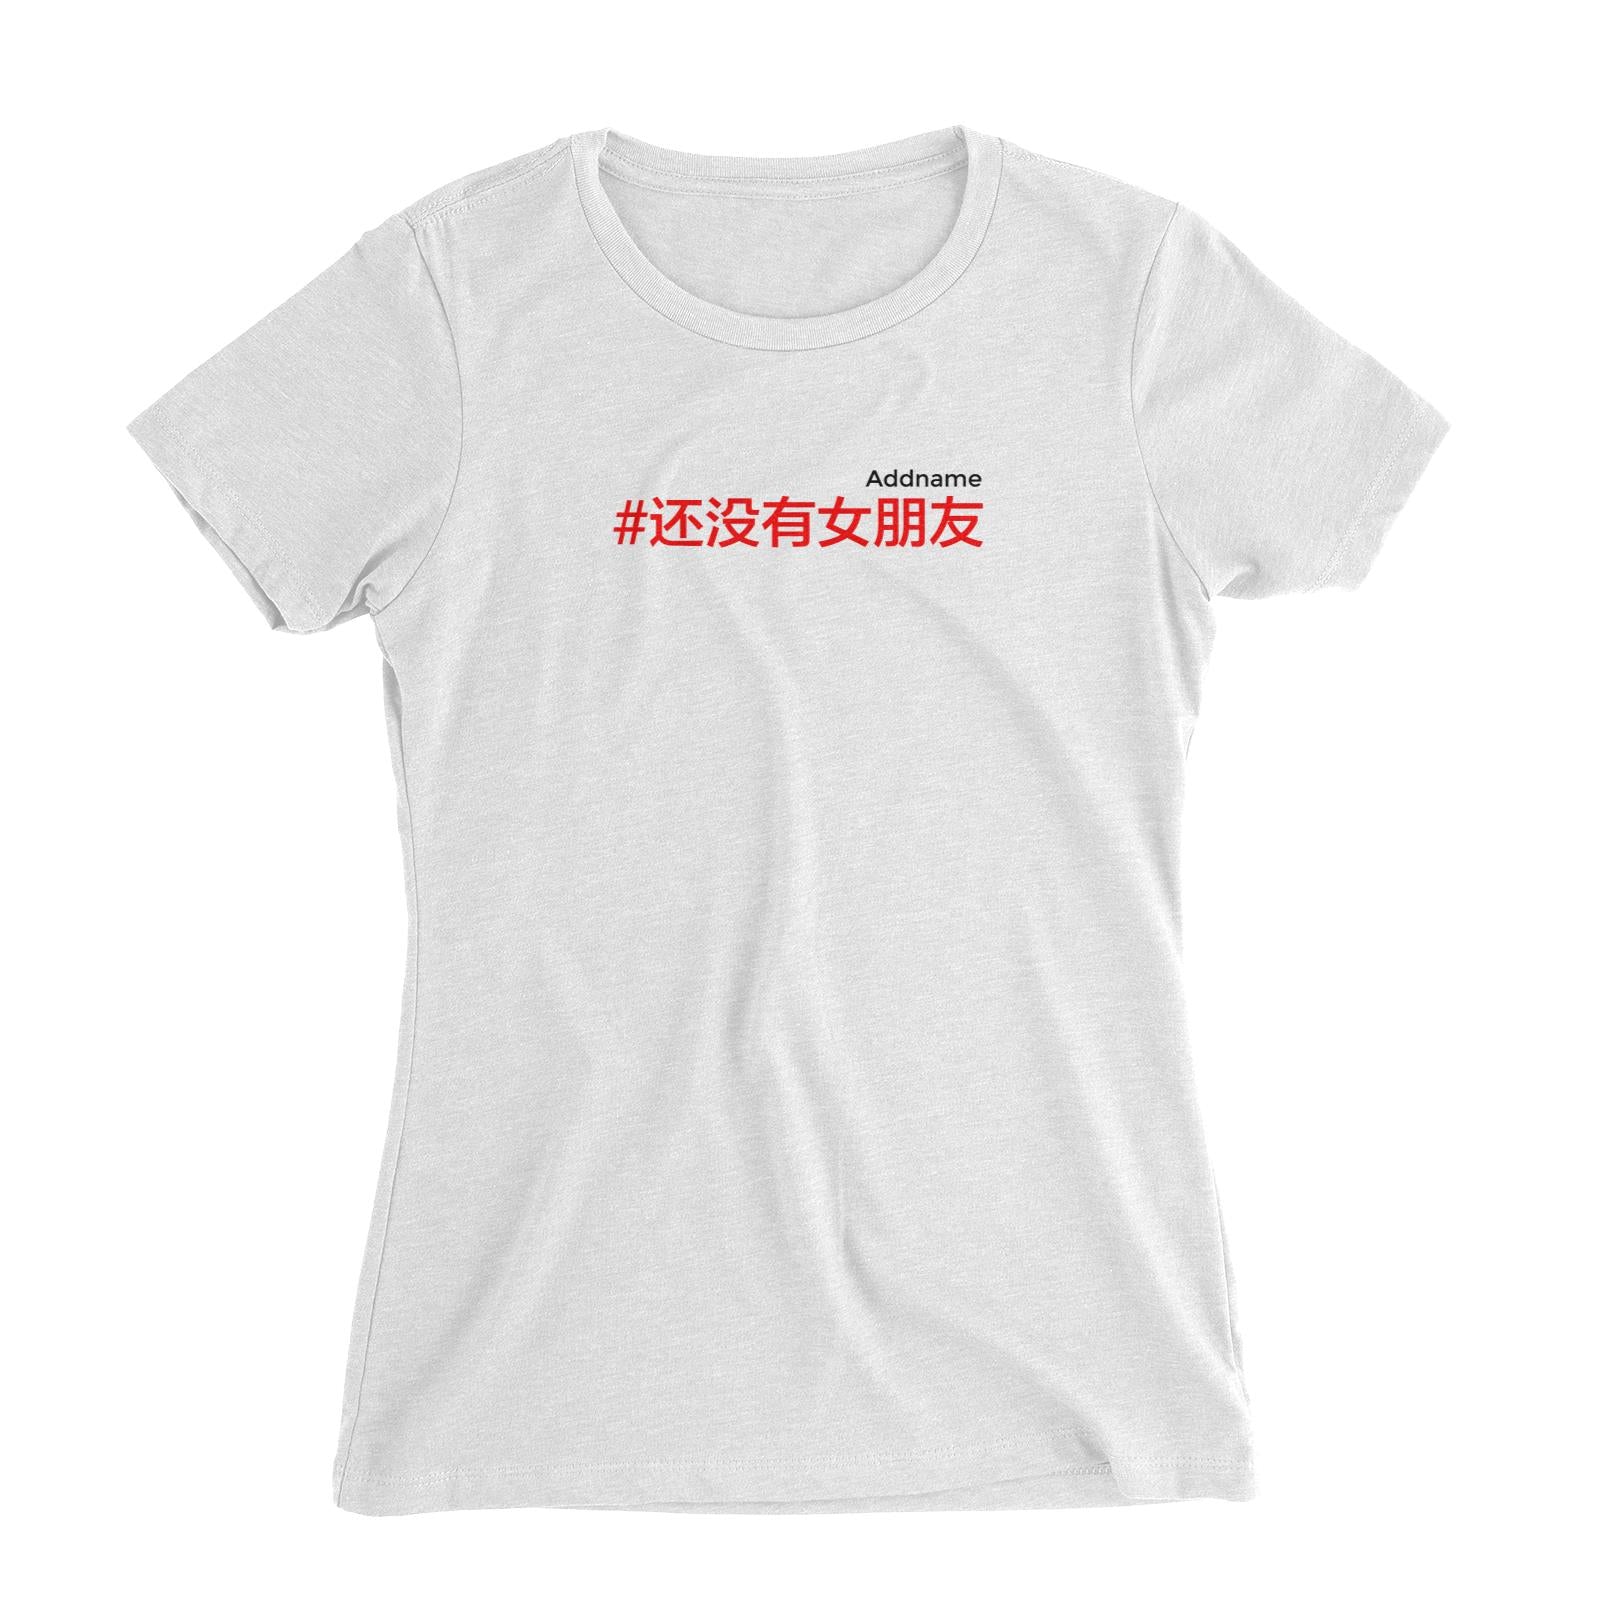 Chinese New Year Hashtag Still no Girlfriend Women's Slim Fit T-Shirt  Personalizable Designs Funny